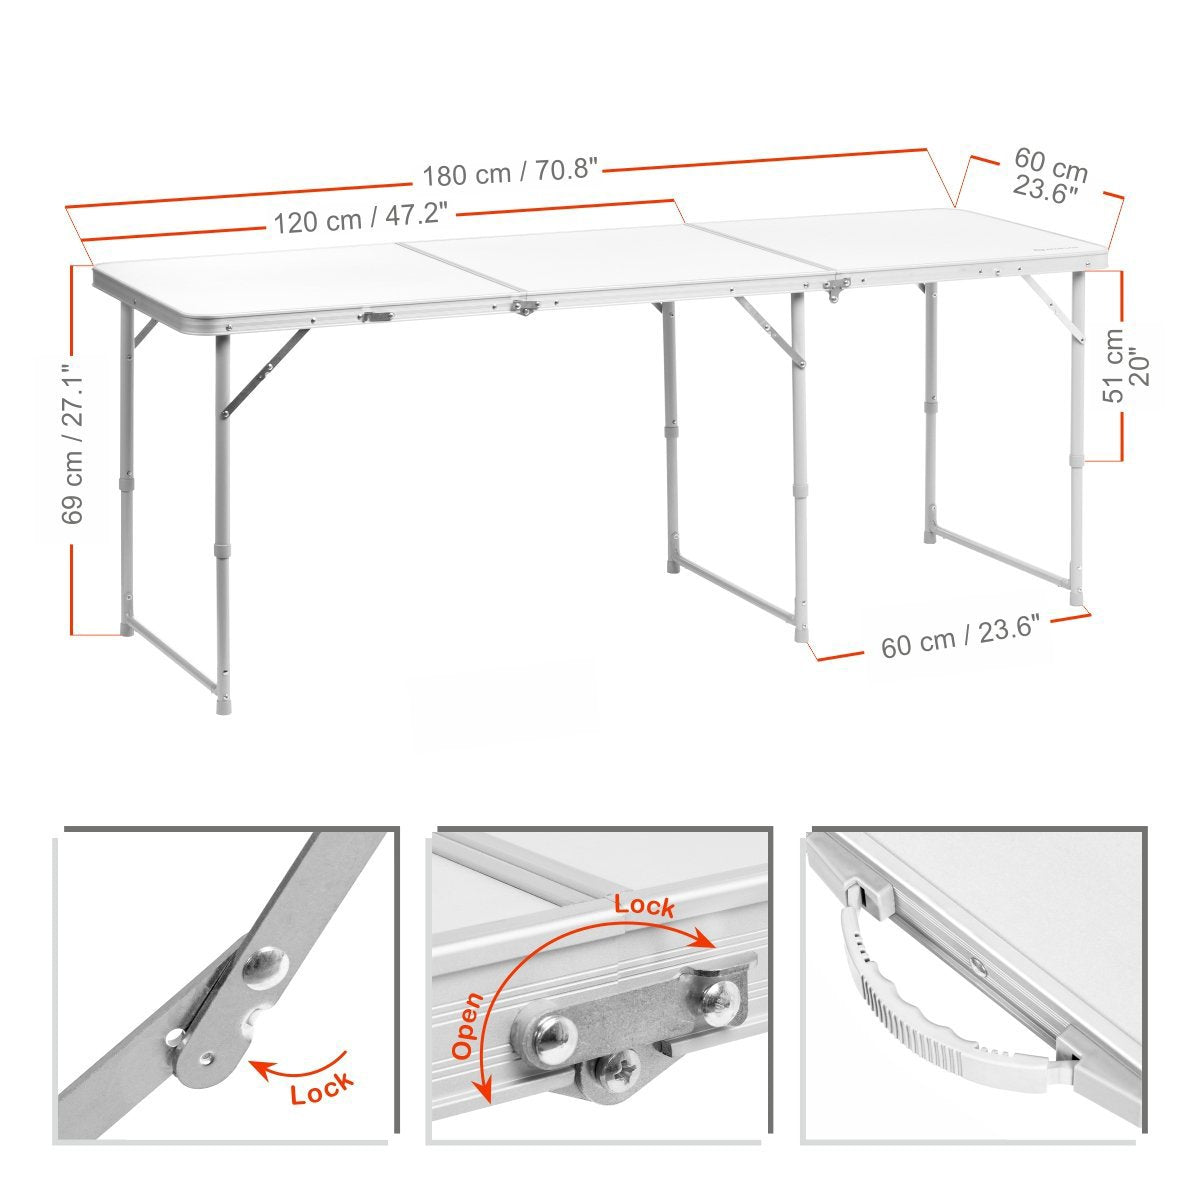 Large Three-Section Aluminum Folding Camping Table folds flat. Fully unfolded, the table is 71 inches long, 23.6 inches high, 27.1 inches high